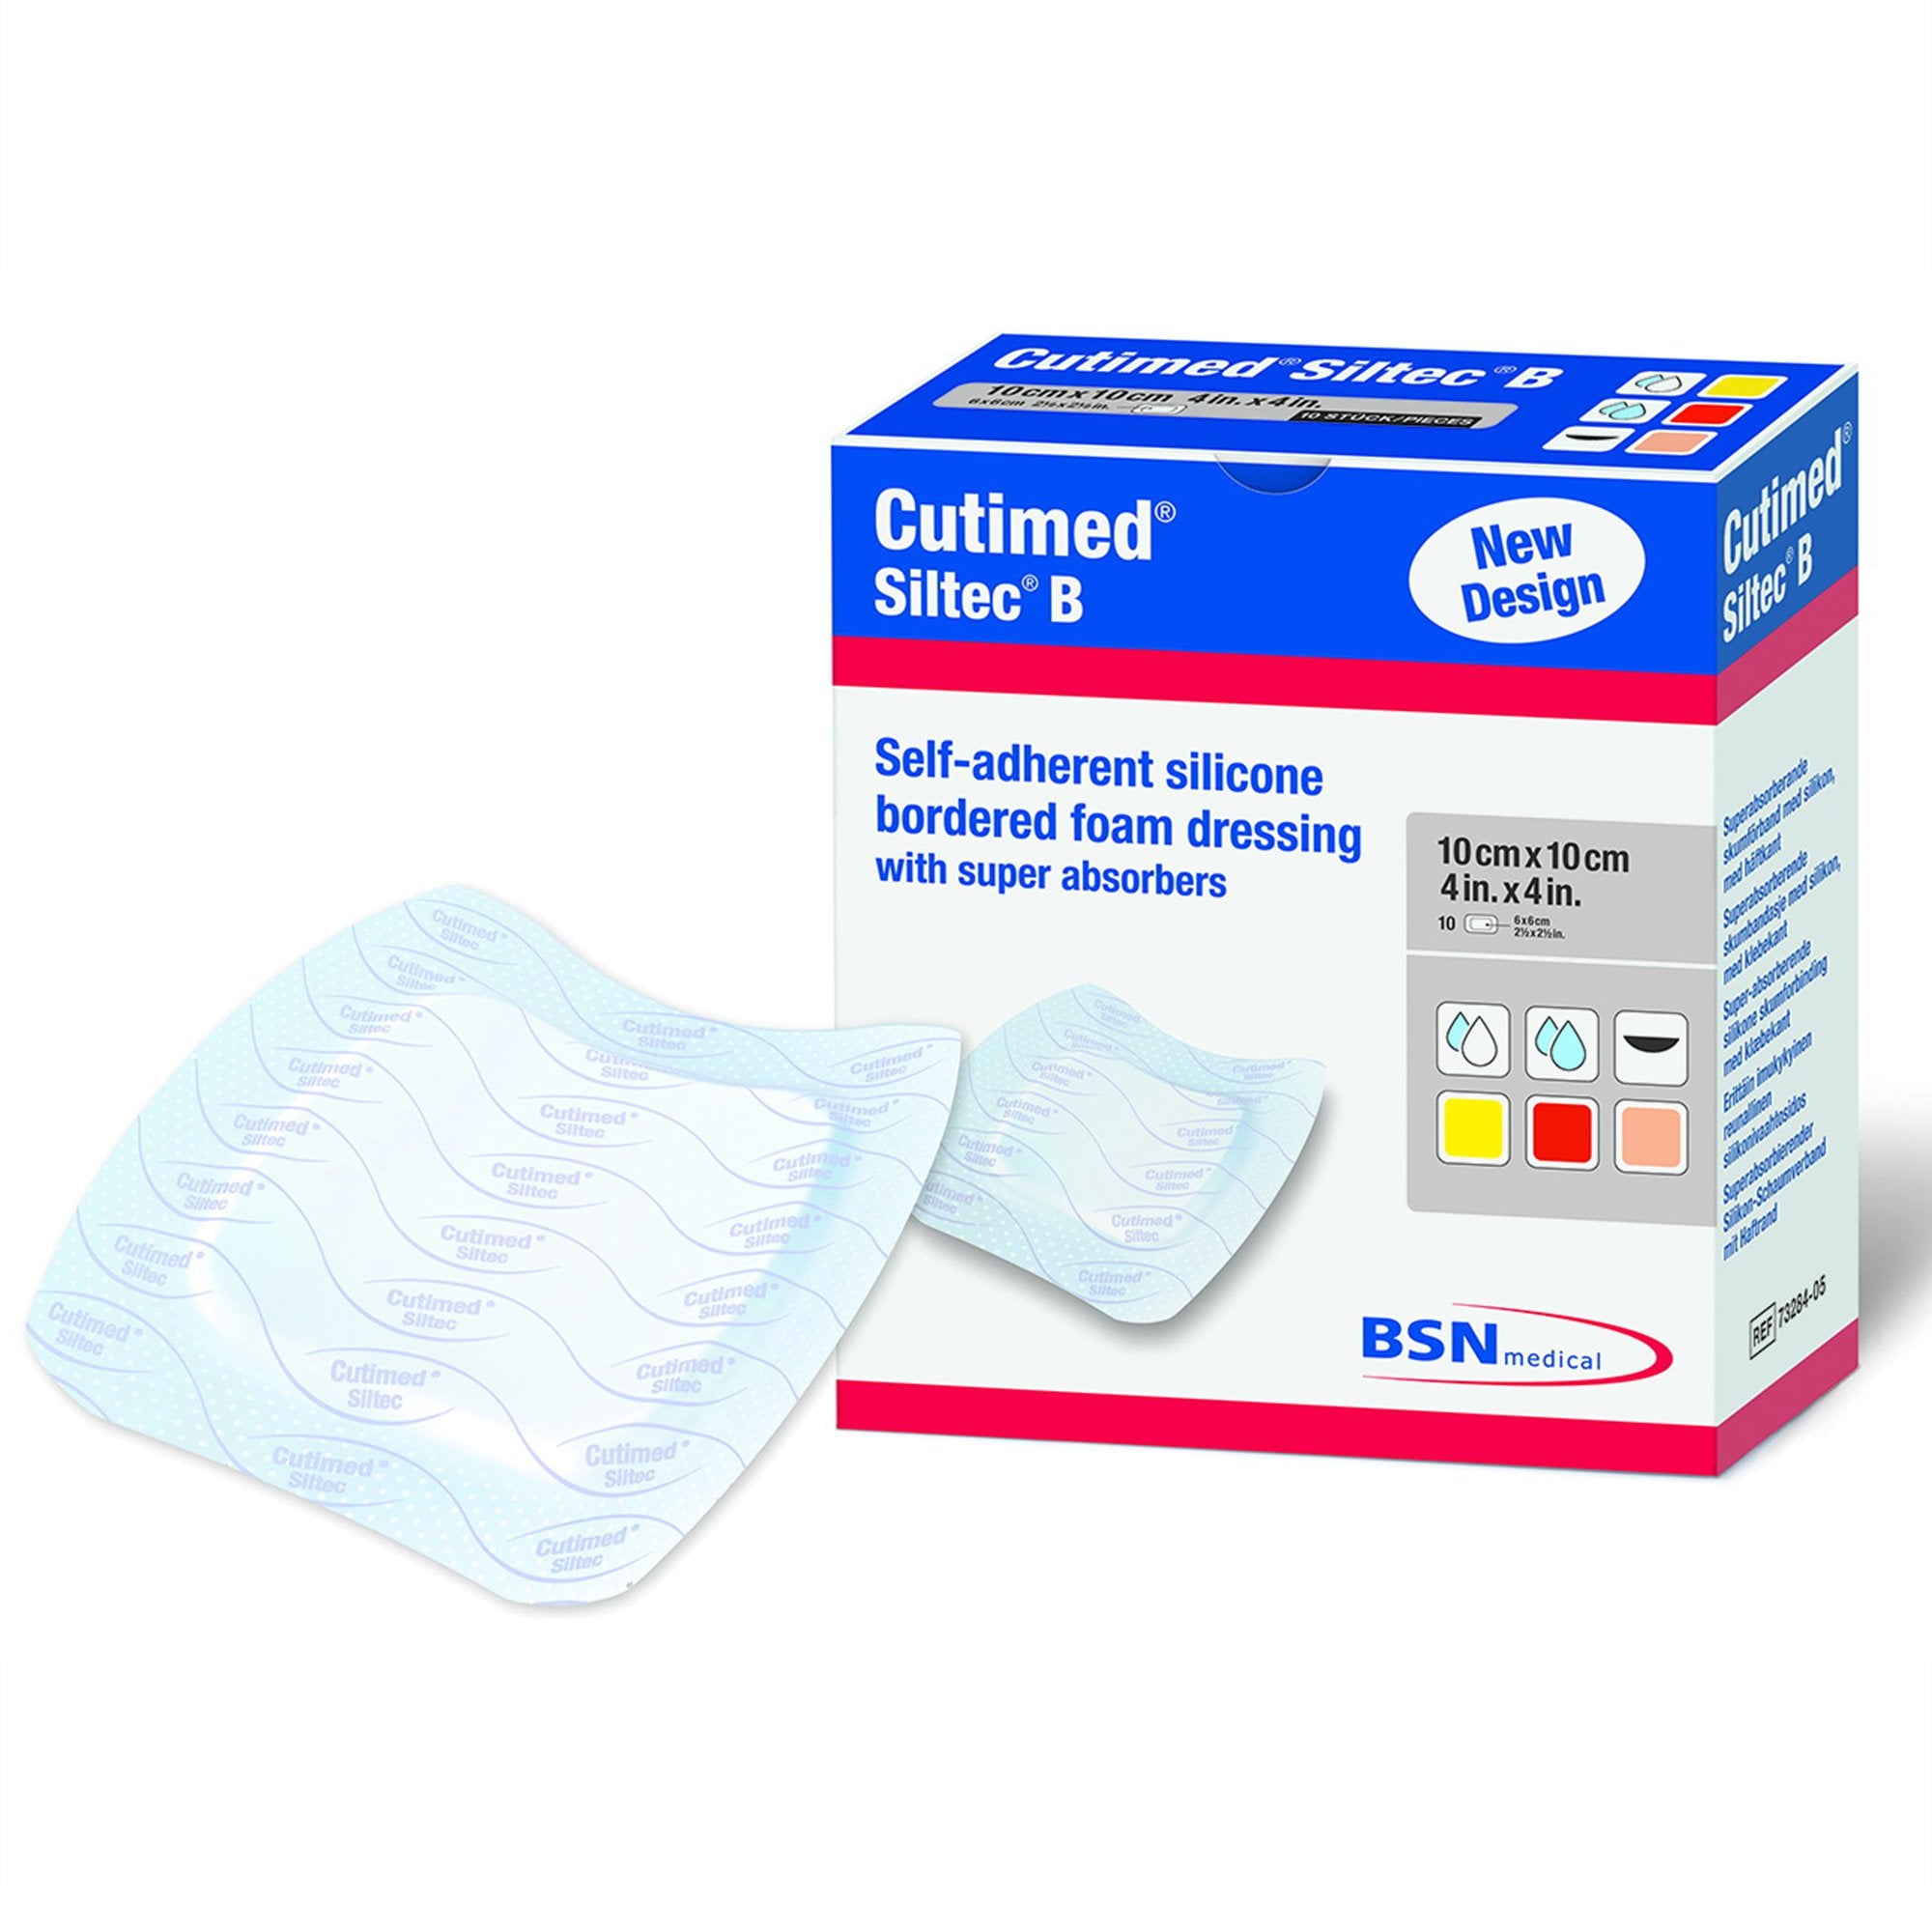 Foam Dressing Cutimed® Siltec B 6 X 6 Inch With Border Film Backing Silicone Face and Border Square Sterile